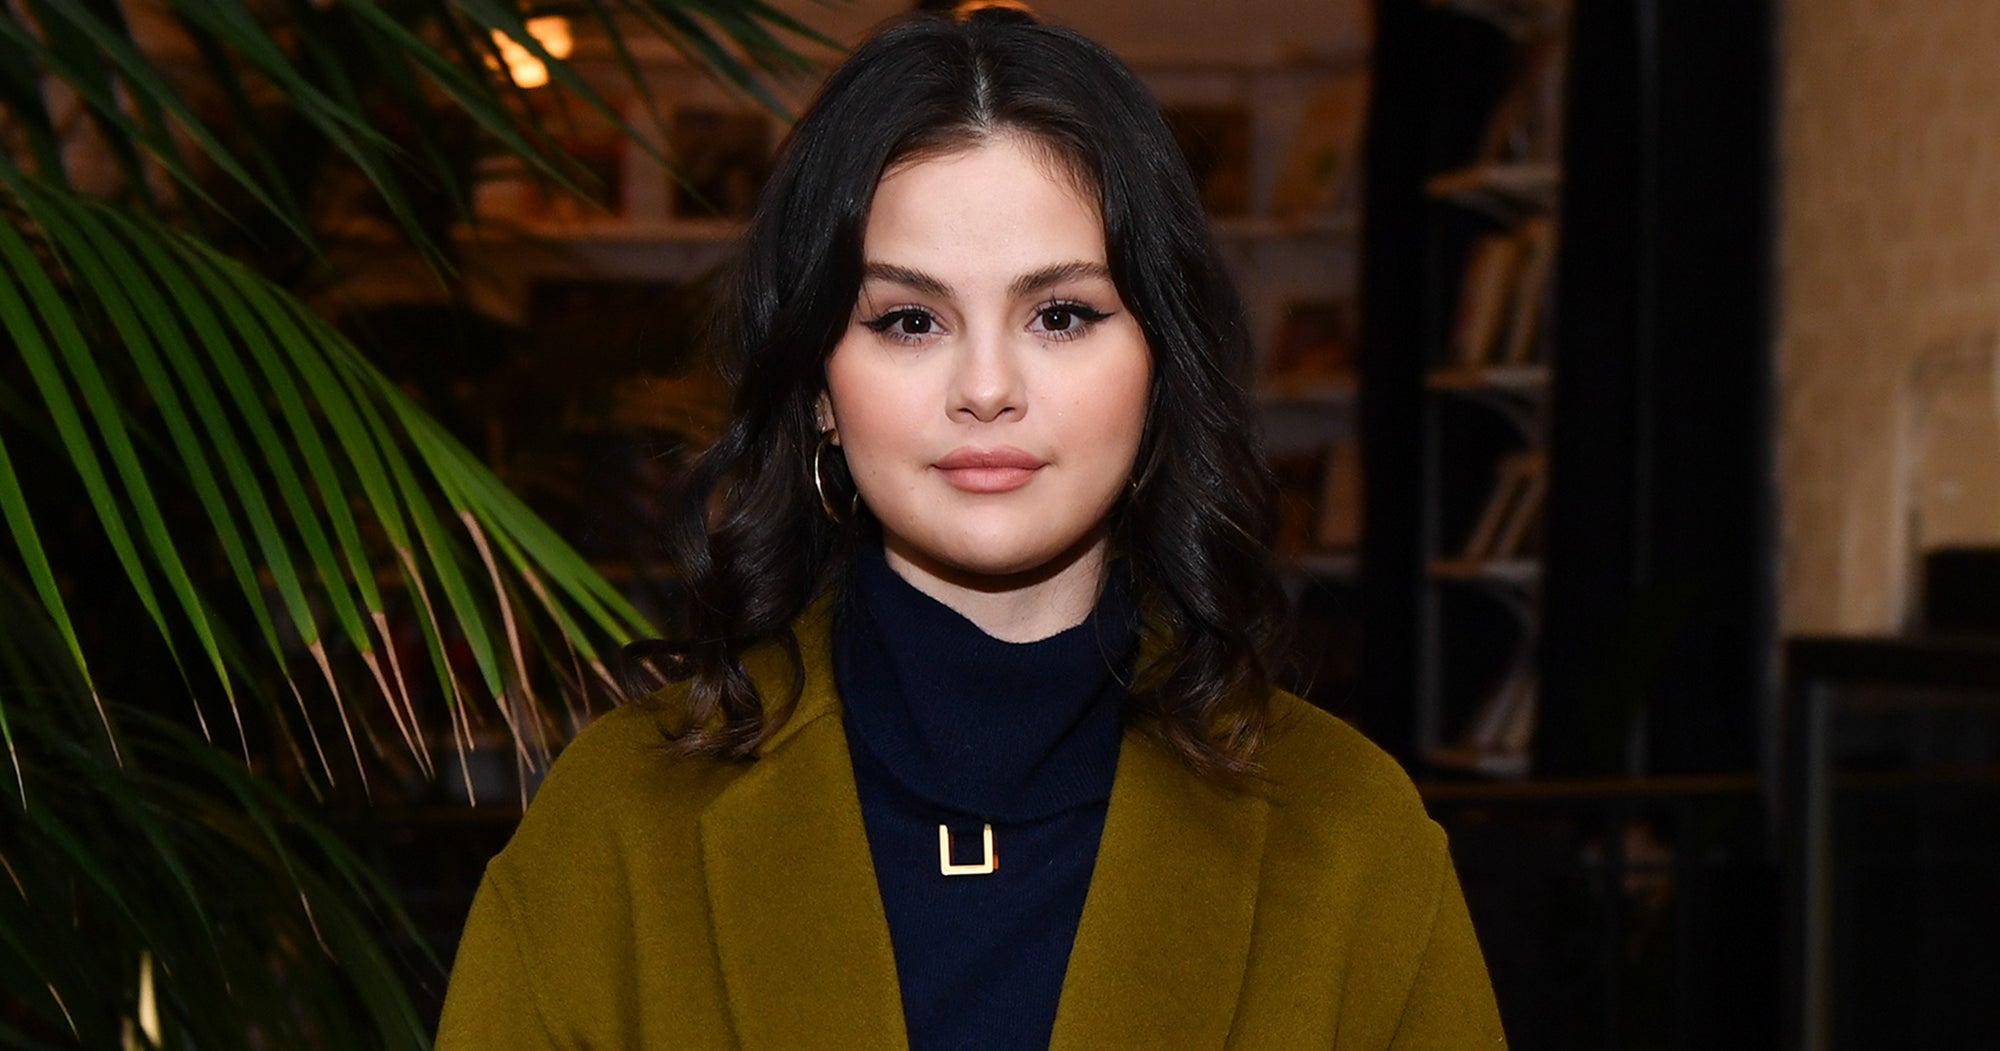 We Should Listen to Palestinians, Not Selena Gomez (Or Other Celebs), Right Now